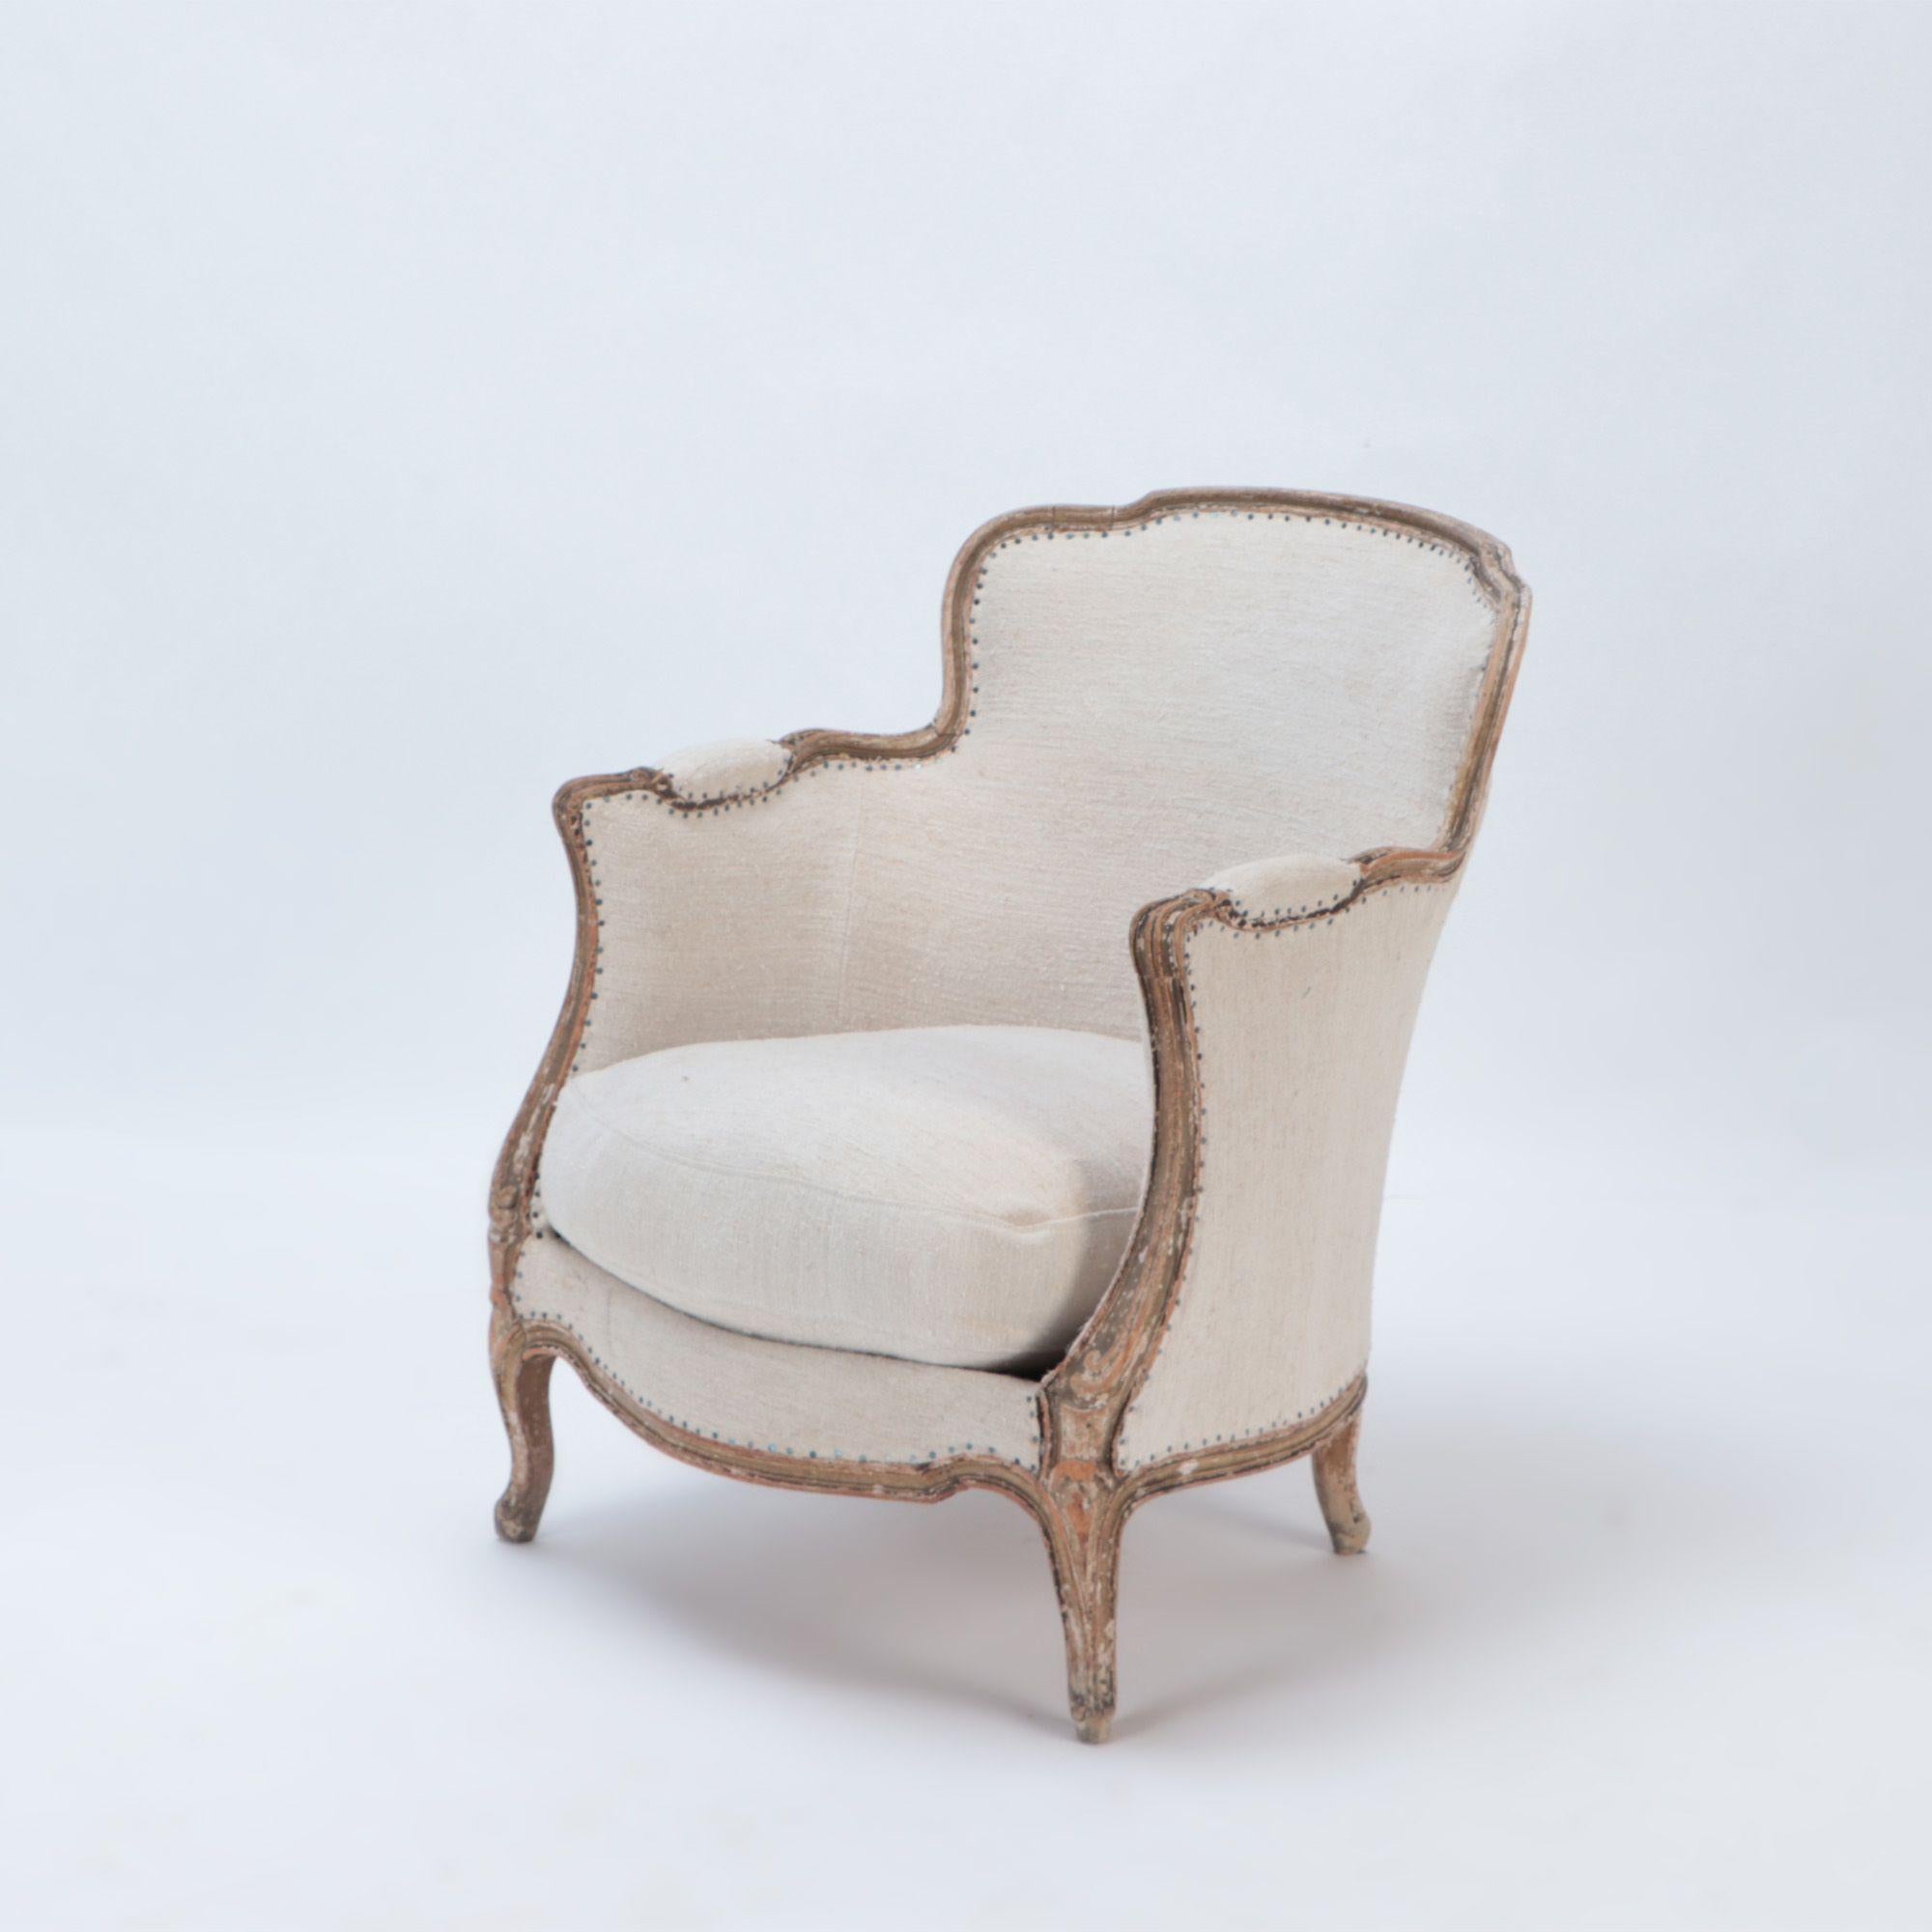 A French Louis XV style armchair and ottoman, cabriole legs and nail trim details. circa 1910.
Measures: Ottoman: 16.25